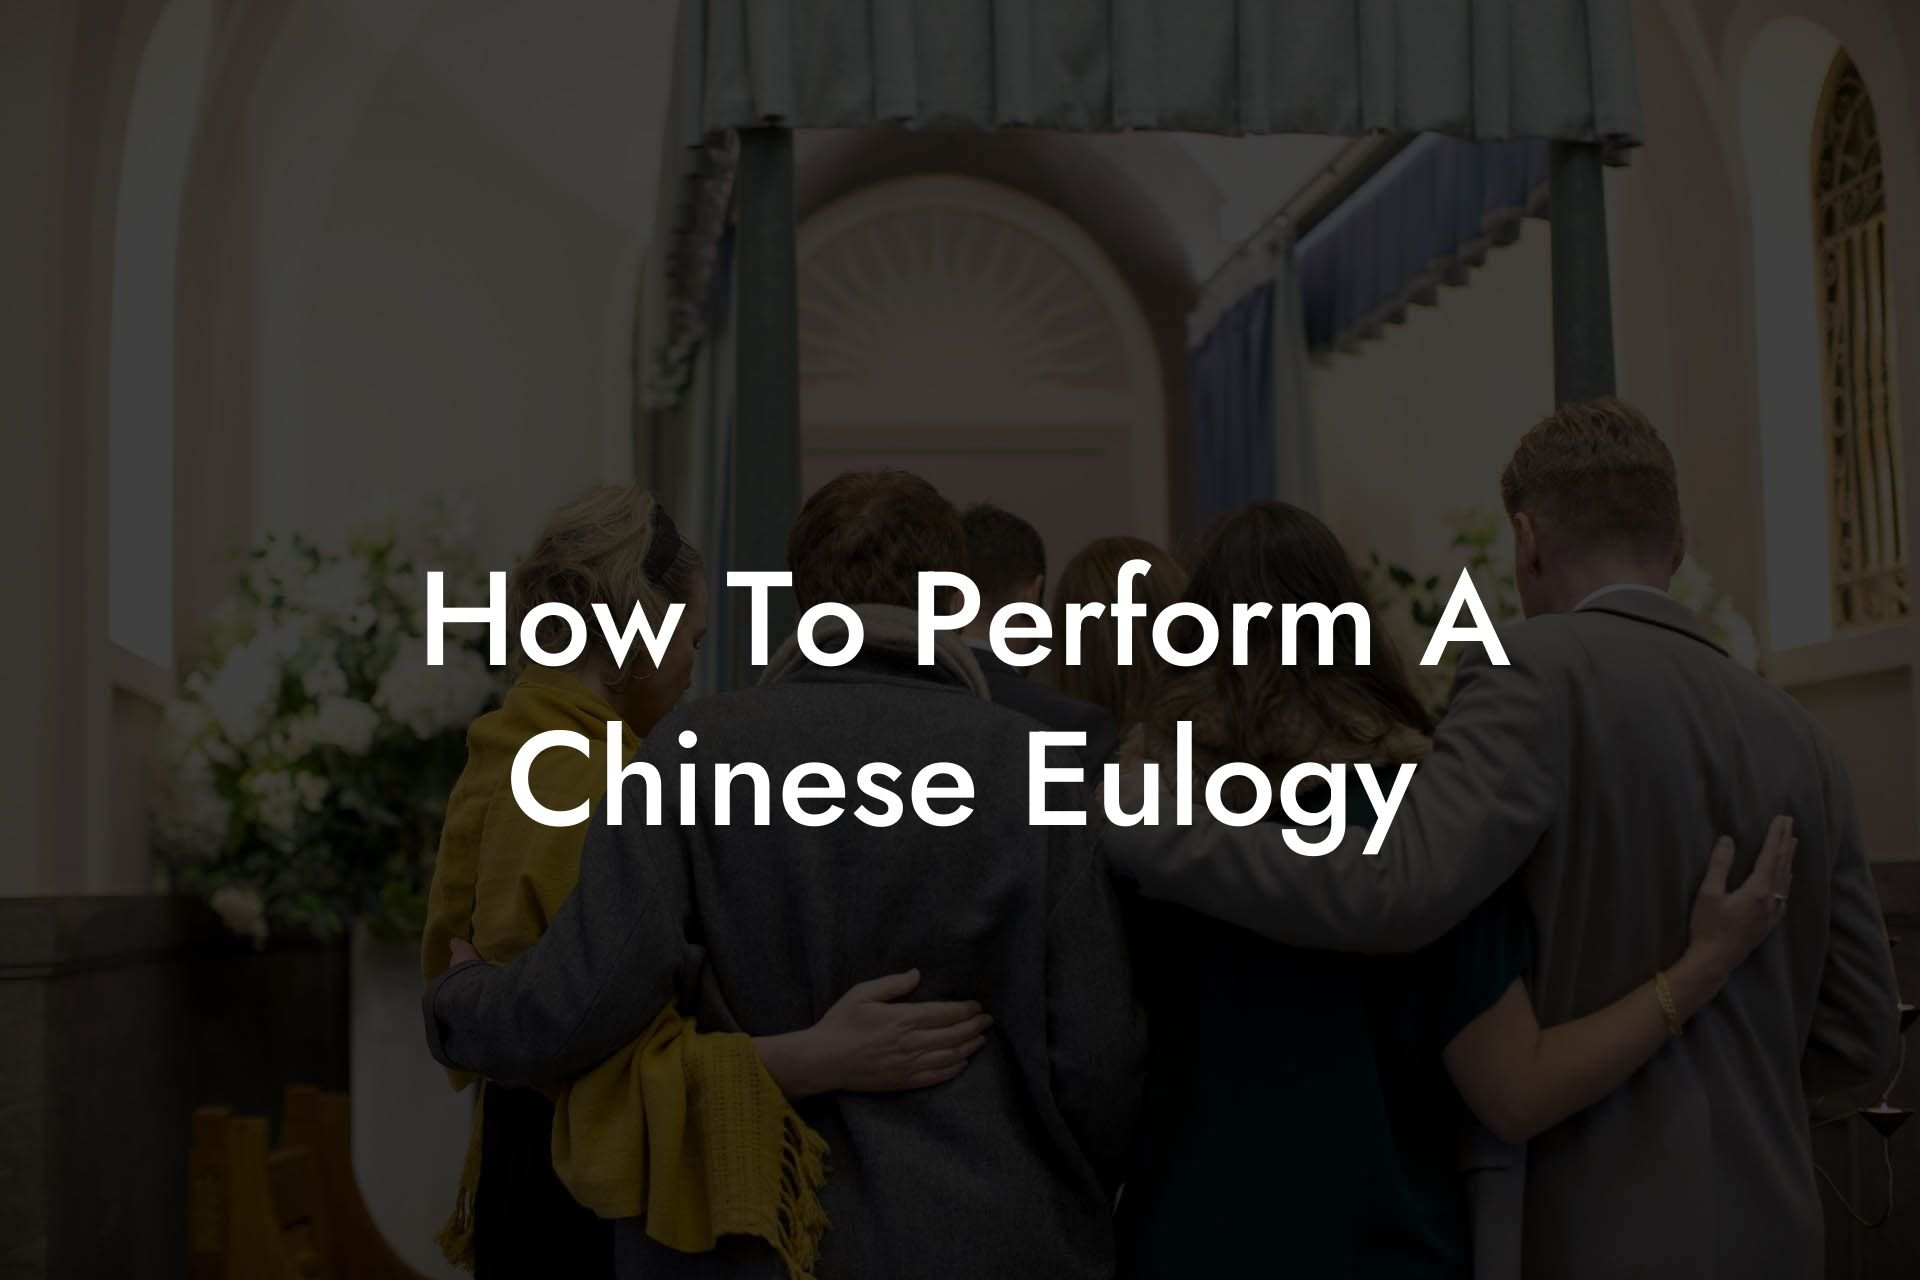 How To Perform A Chinese Eulogy